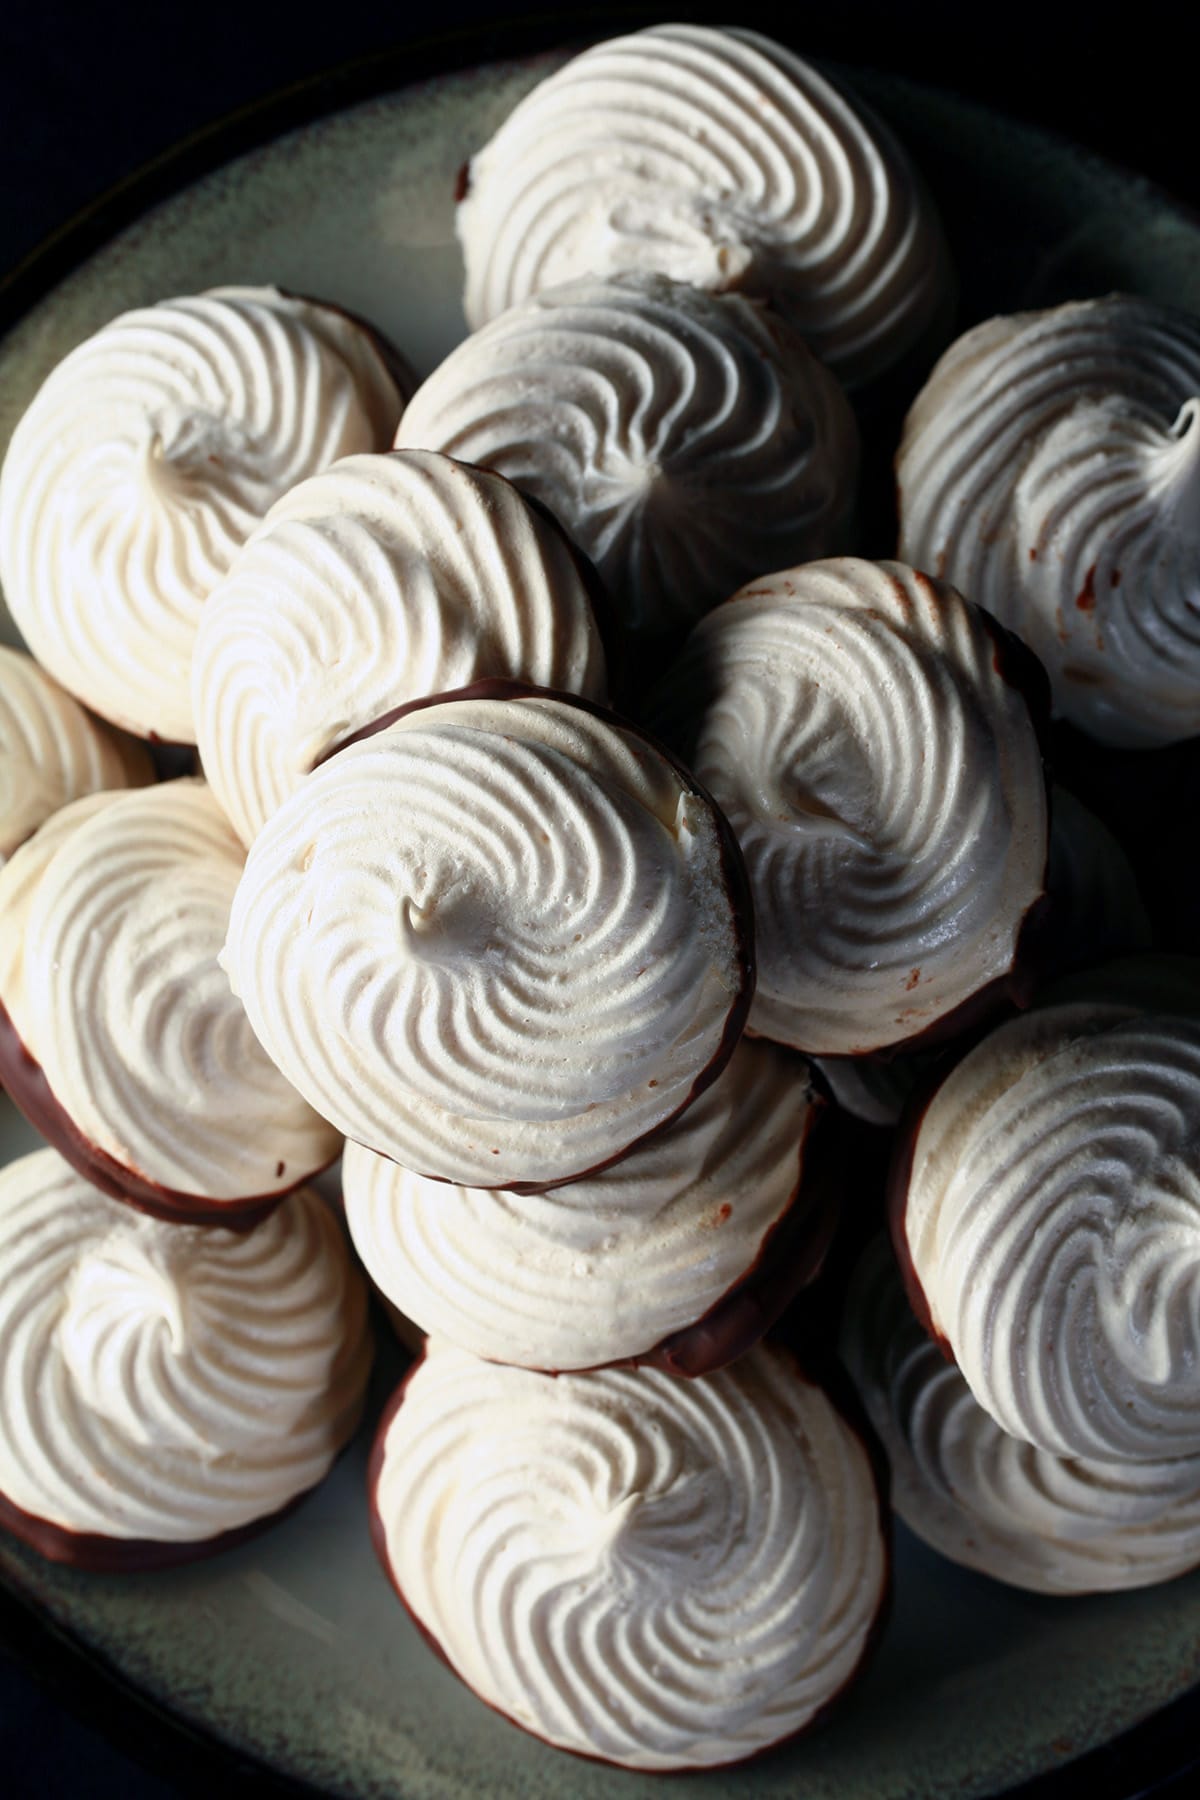 A plate piled high with swirl shaped malted milk meringue cookies. The bottom of each one is coated in chocolate.